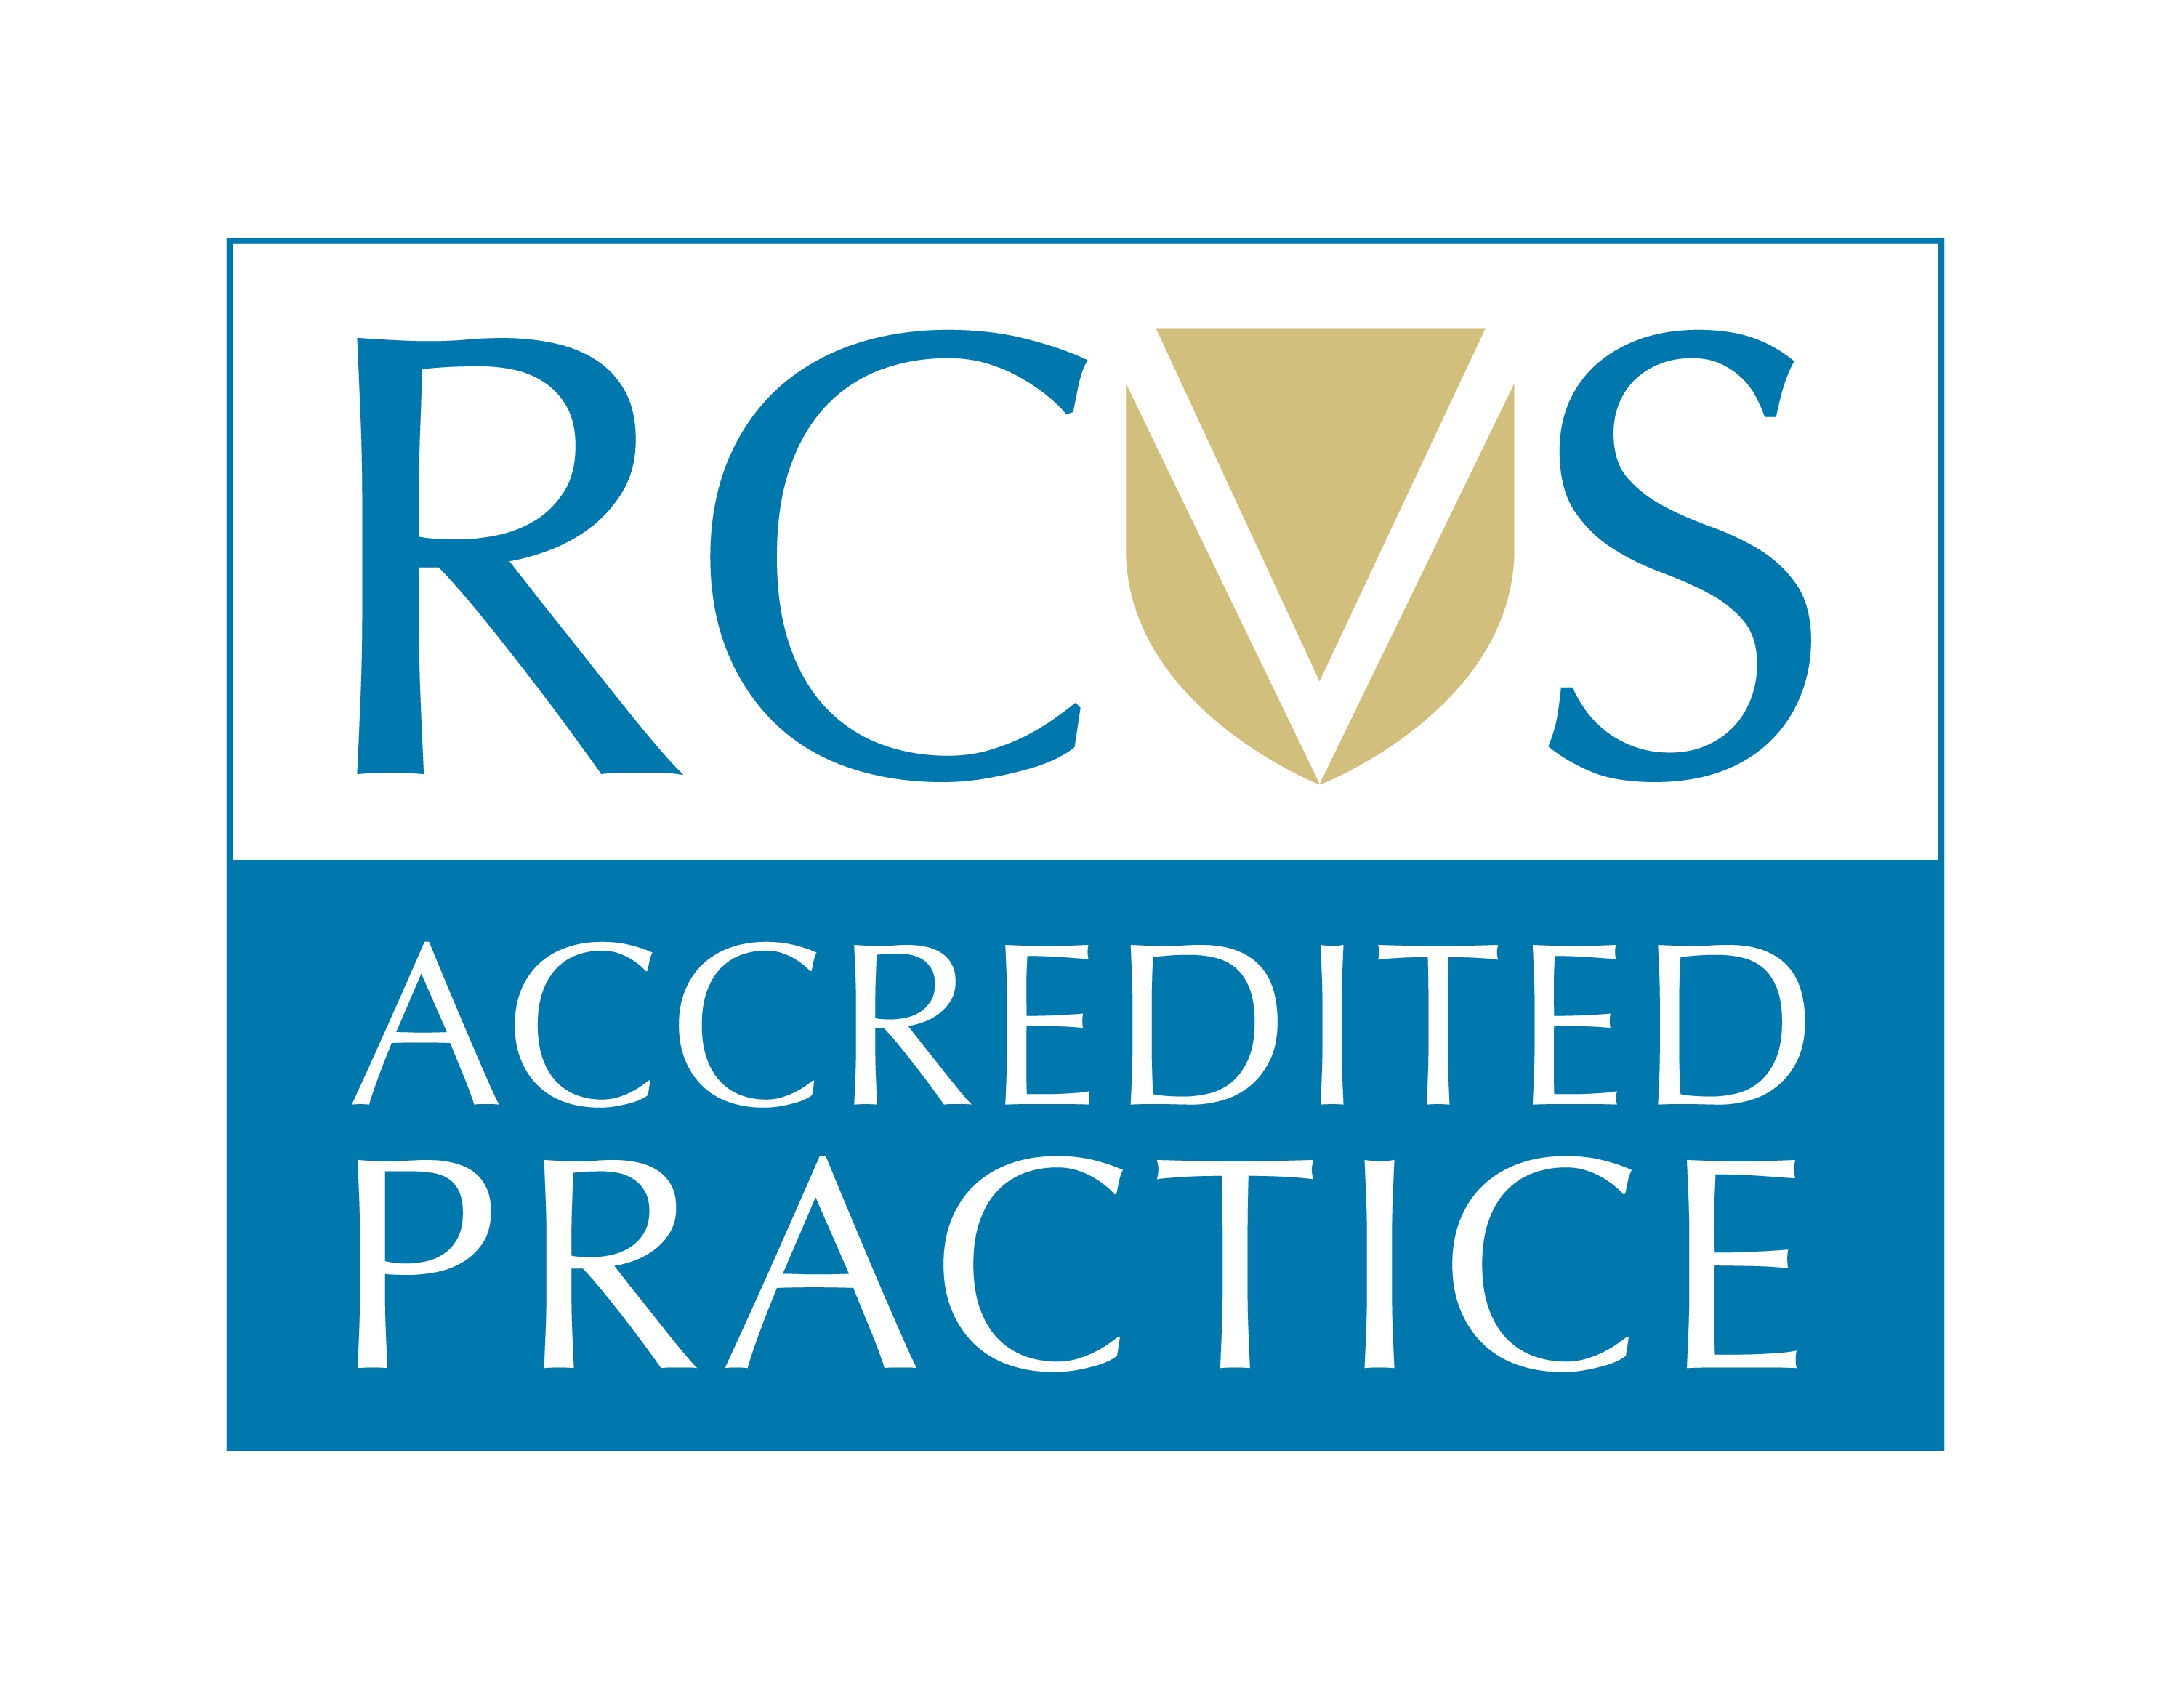 An image of the 'RCVS Accredited Practice' certificate